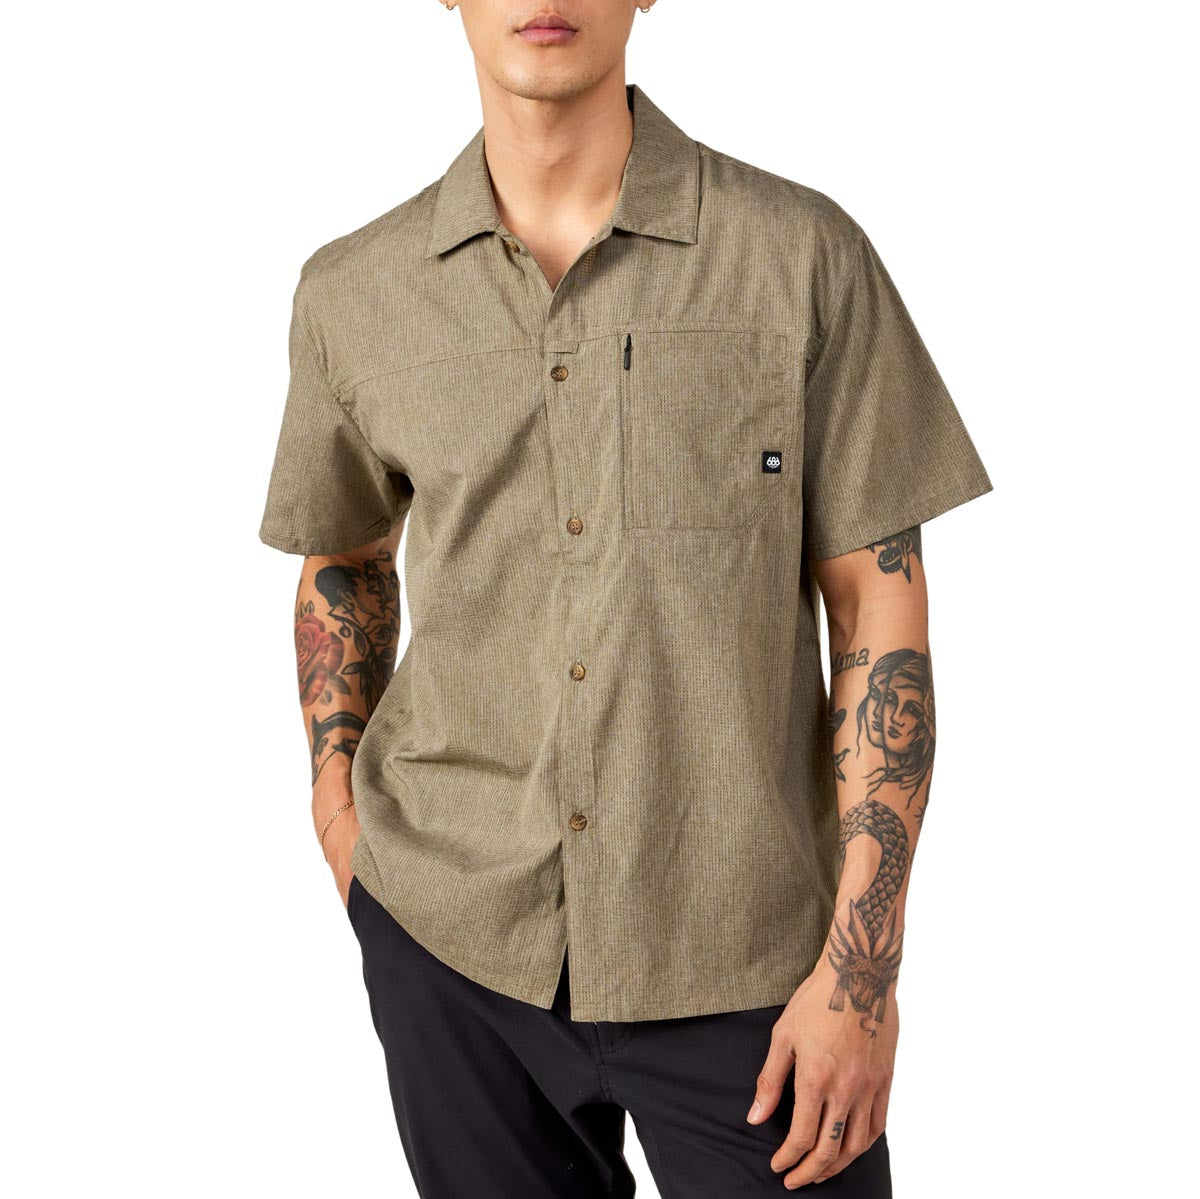 686 Canopy Woven Shirt - Heather Dusty Fatigue image 1